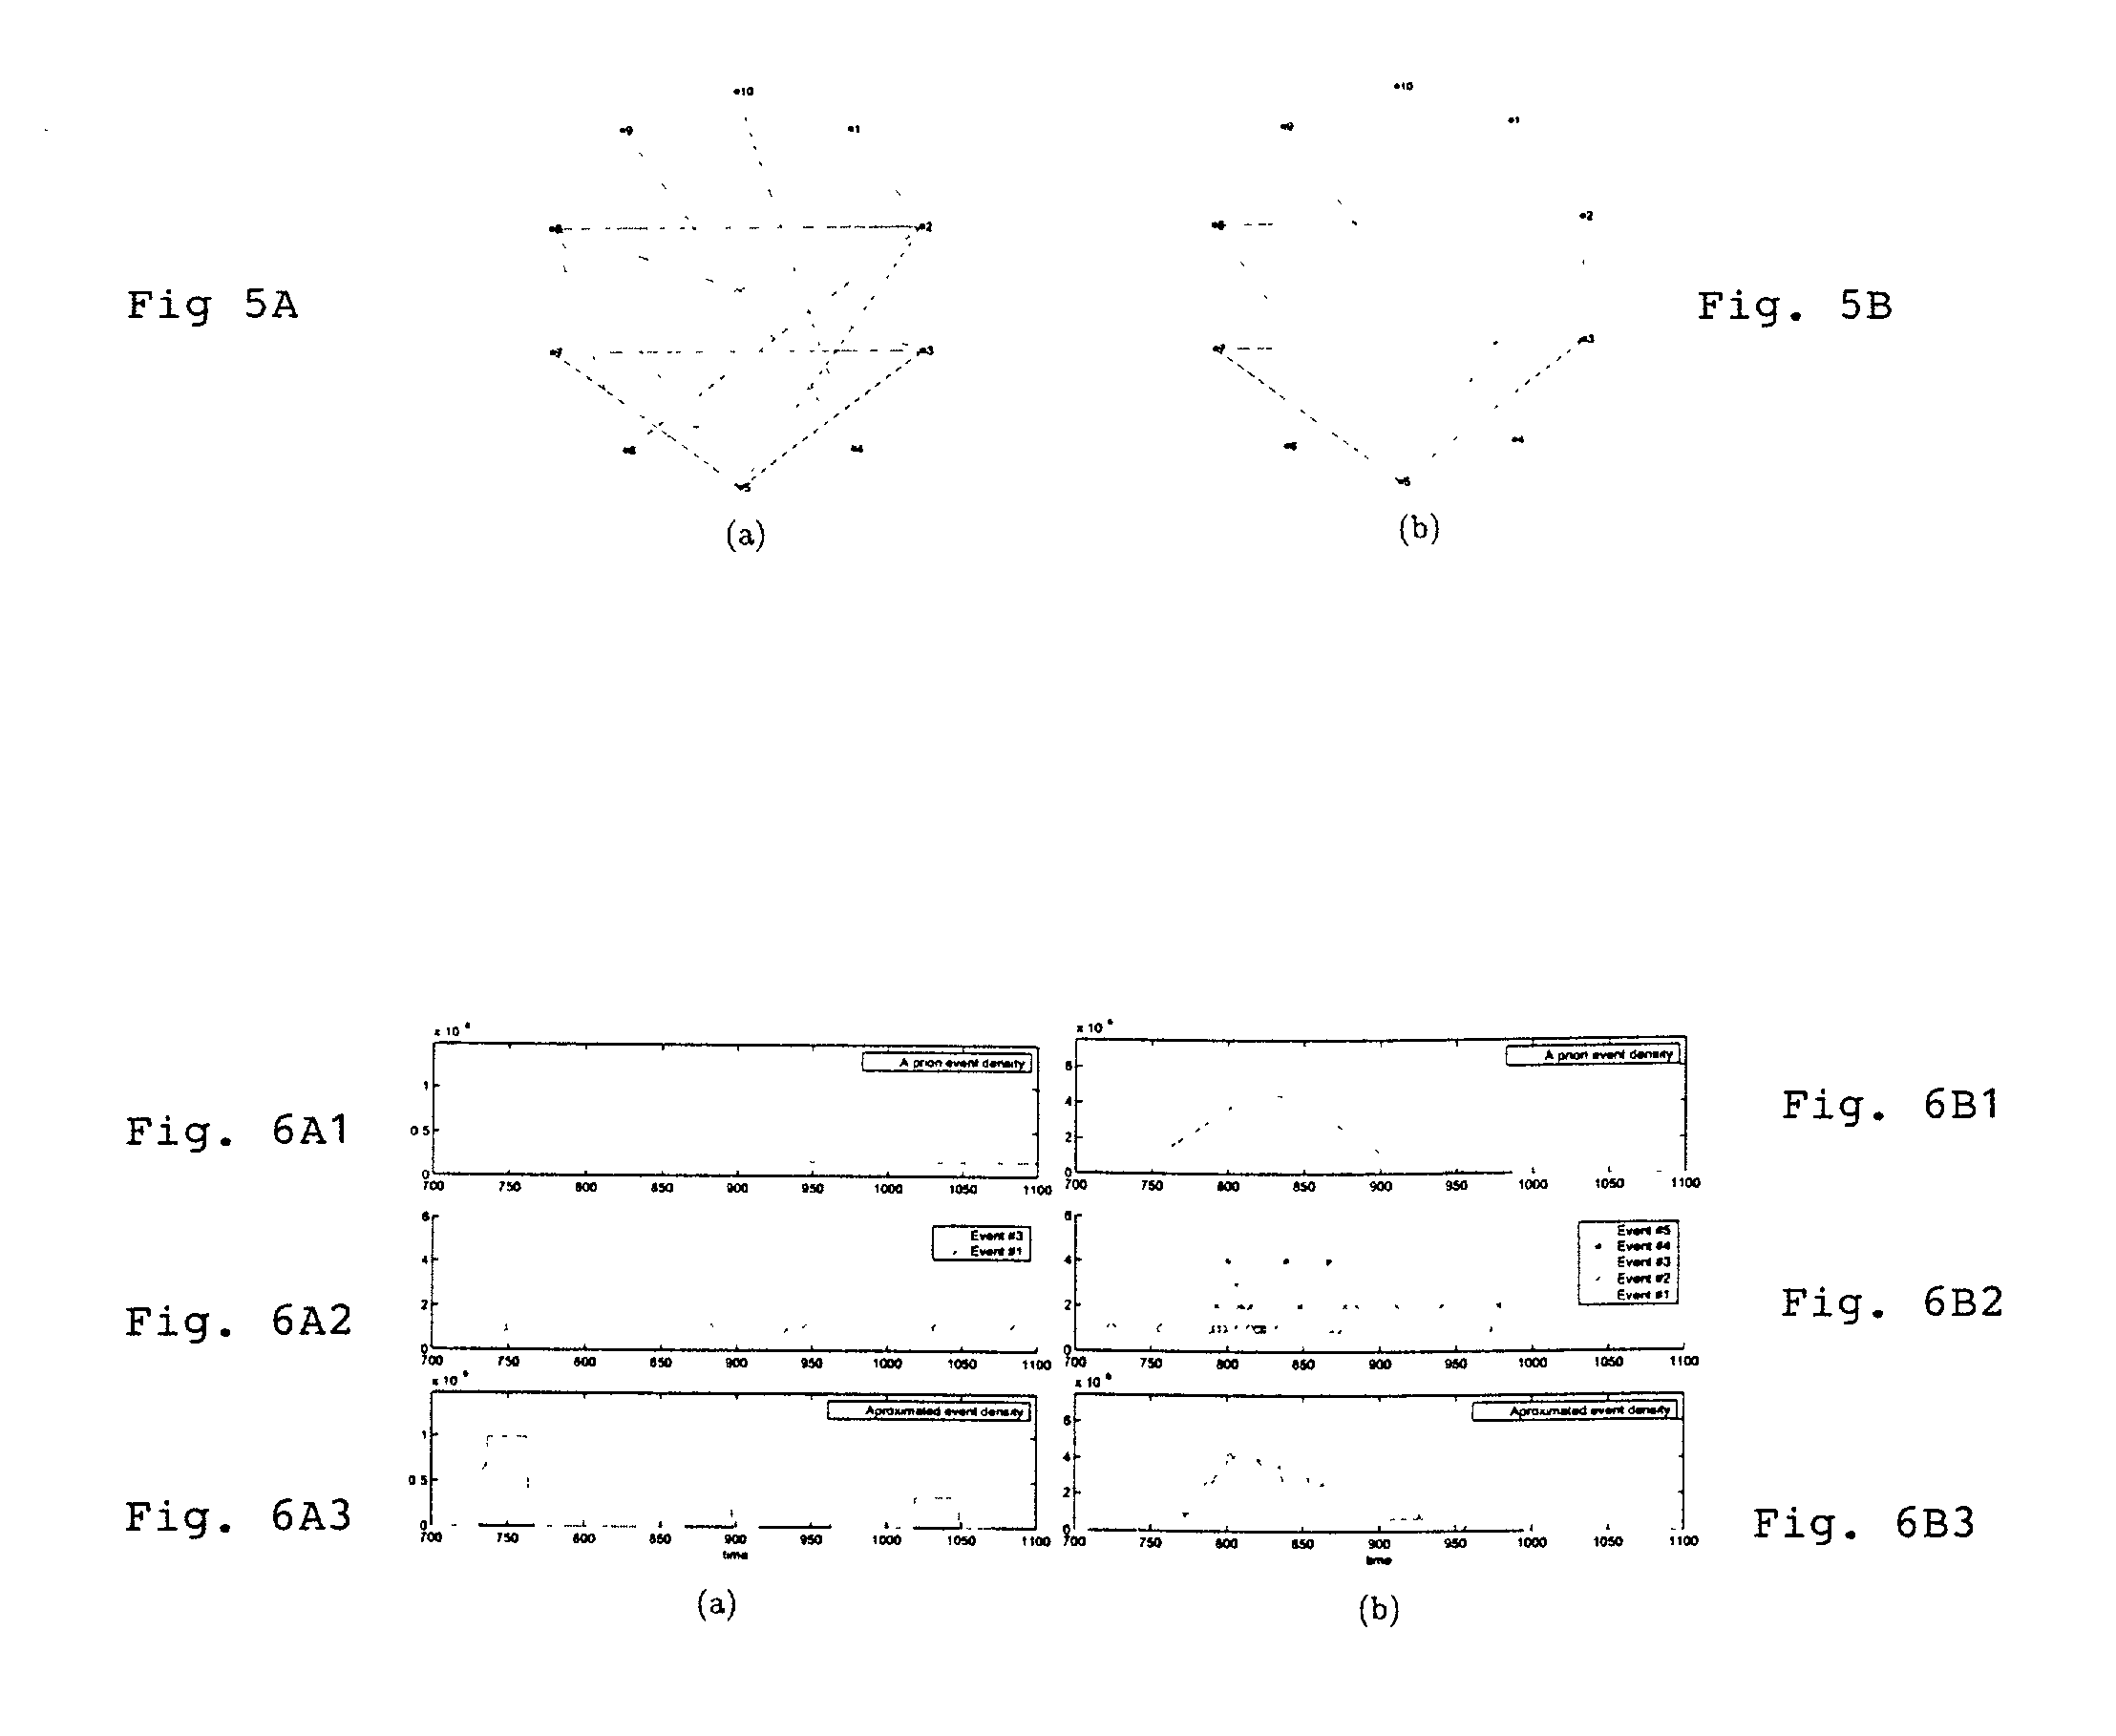 Method and system for finding a query-subset of events within a master-set of events